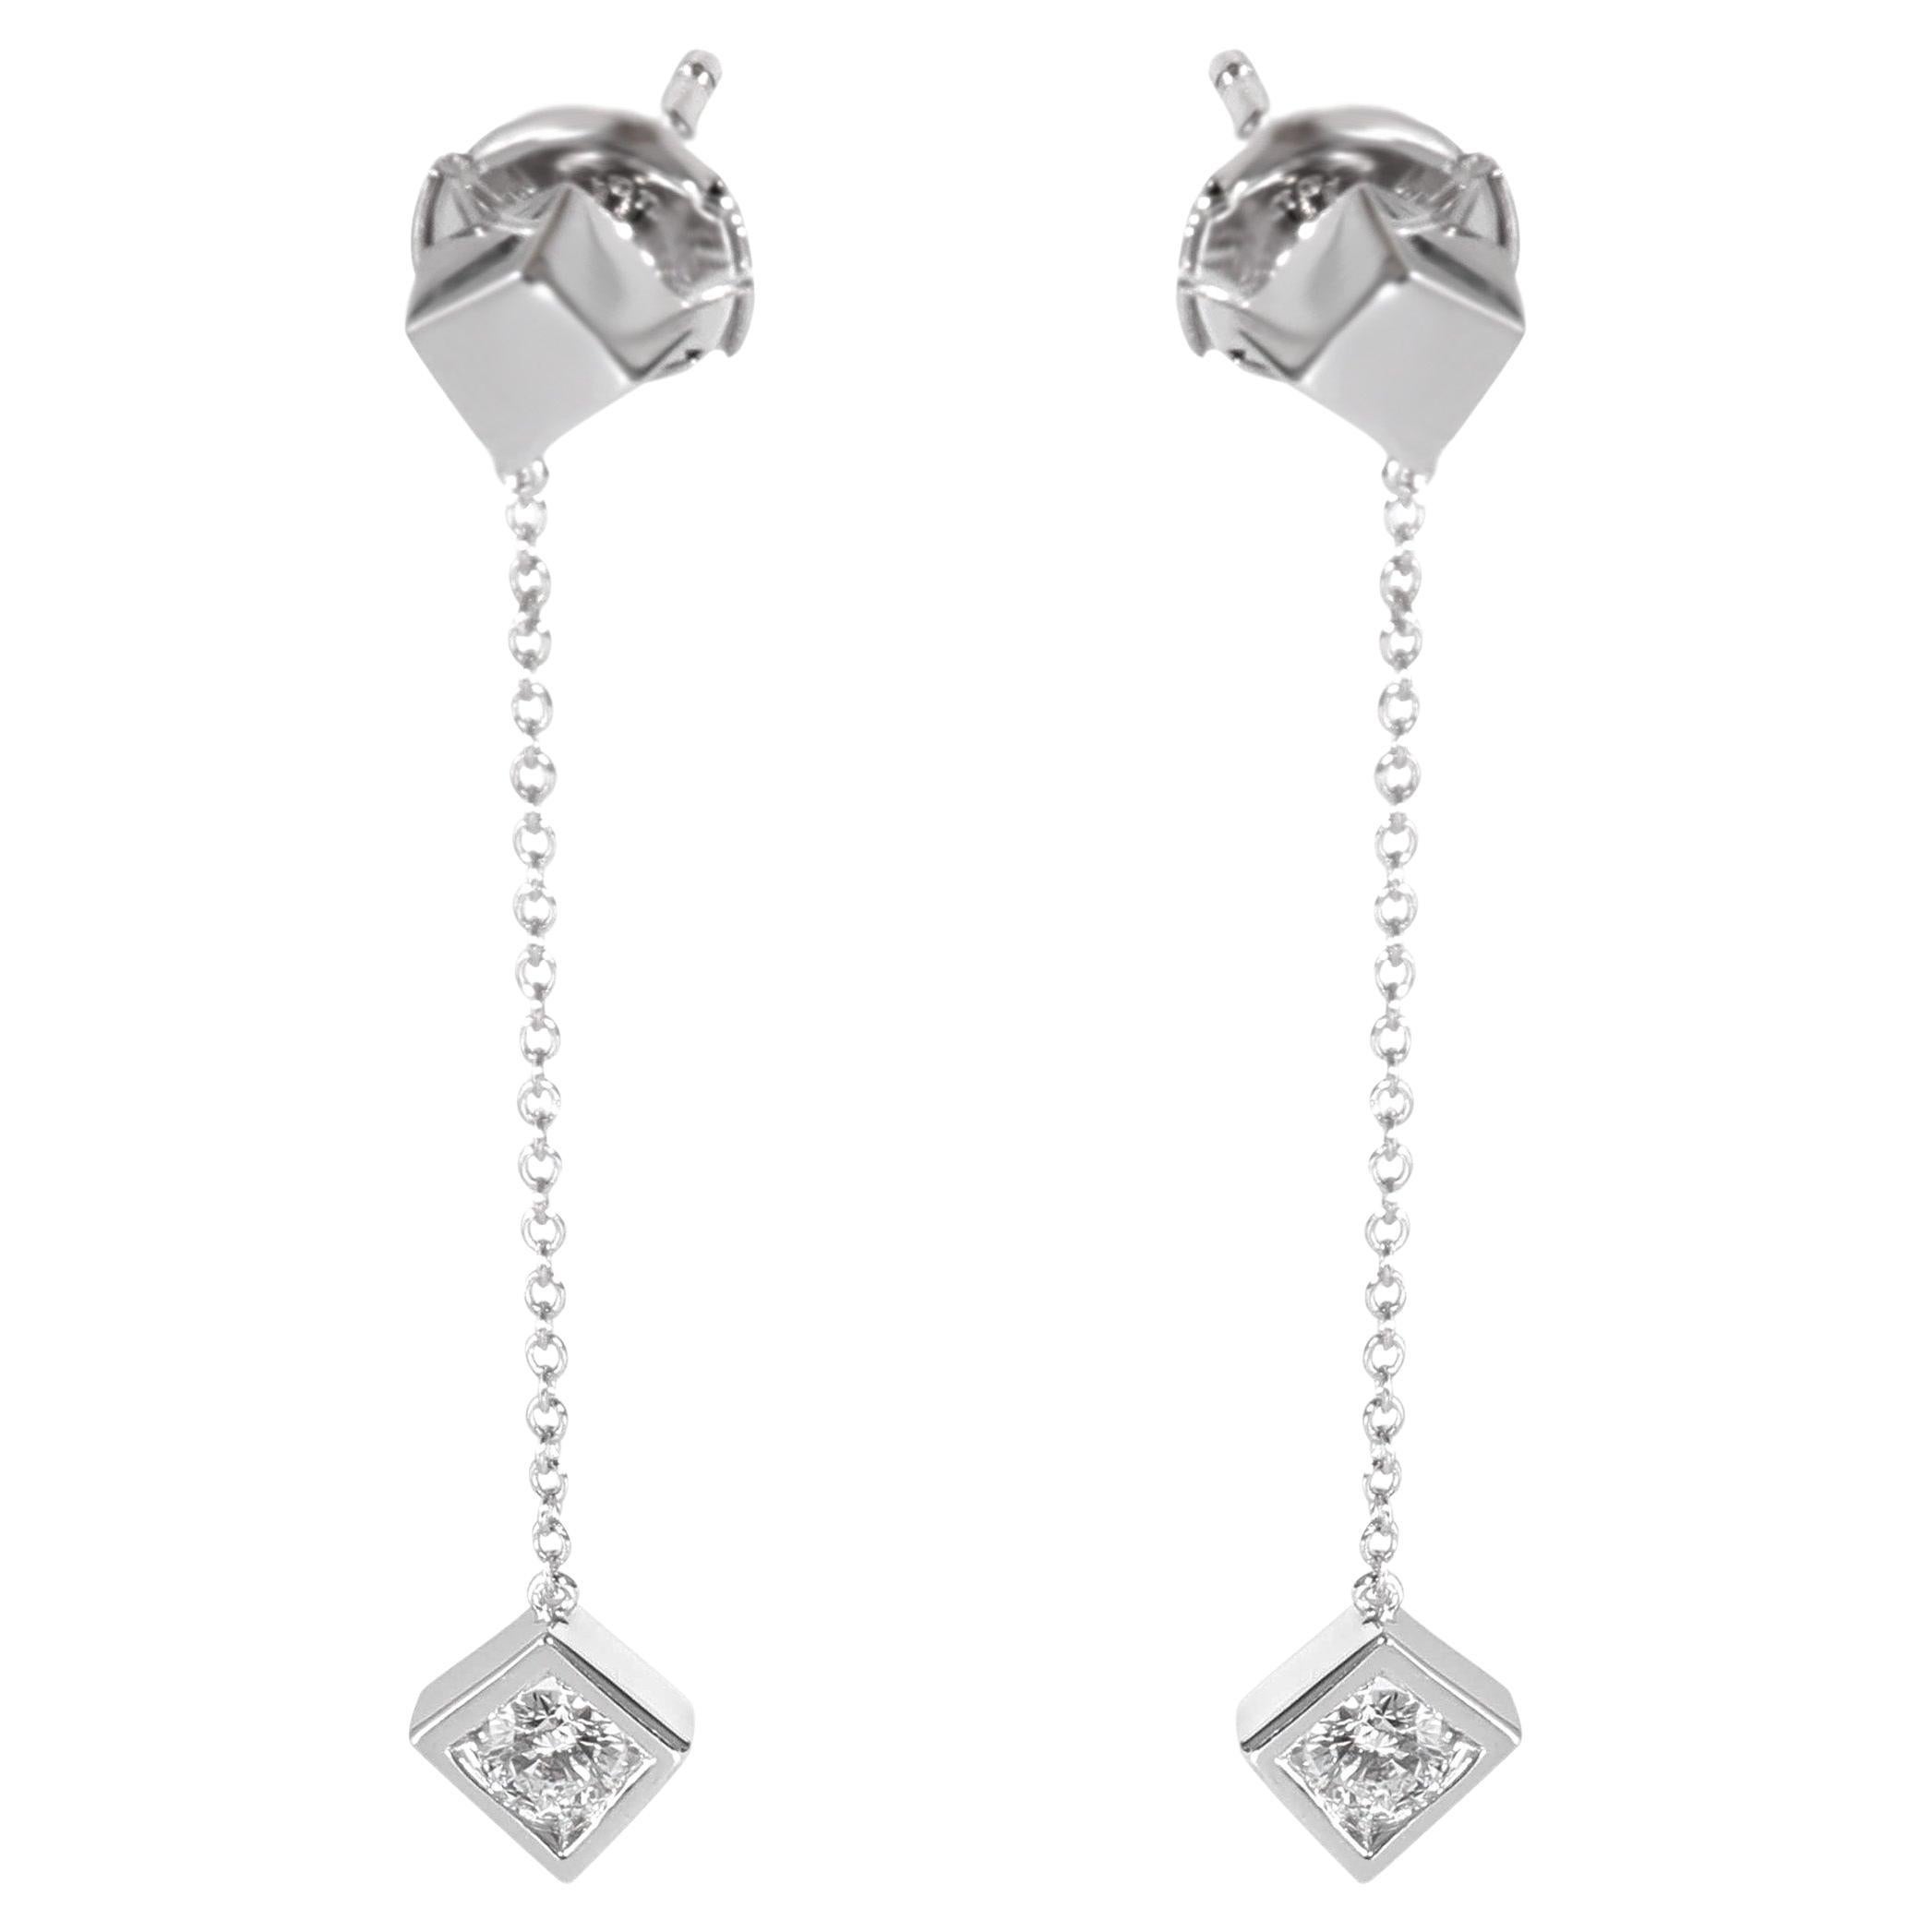 Tiffany & Co. Frank Gehry Torque Cube Drop Earring in 18k White Gold 0.40 CTW For Sale